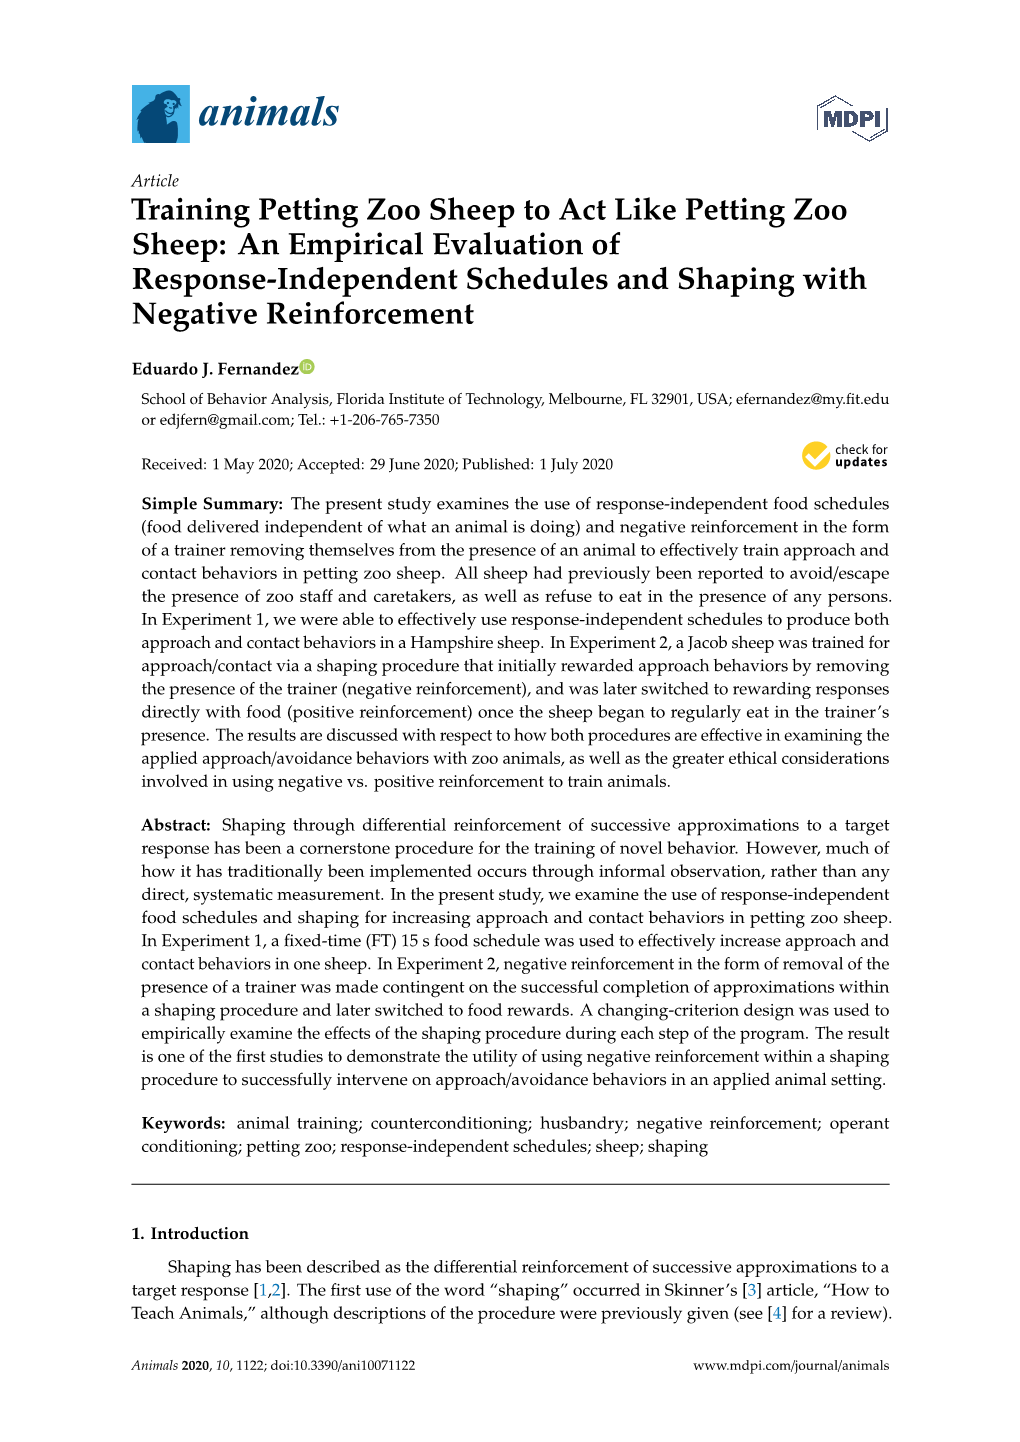 Training Petting Zoo Sheep to Act Like Petting Zoo Sheep: an Empirical Evaluation of Response-Independent Schedules and Shaping with Negative Reinforcement